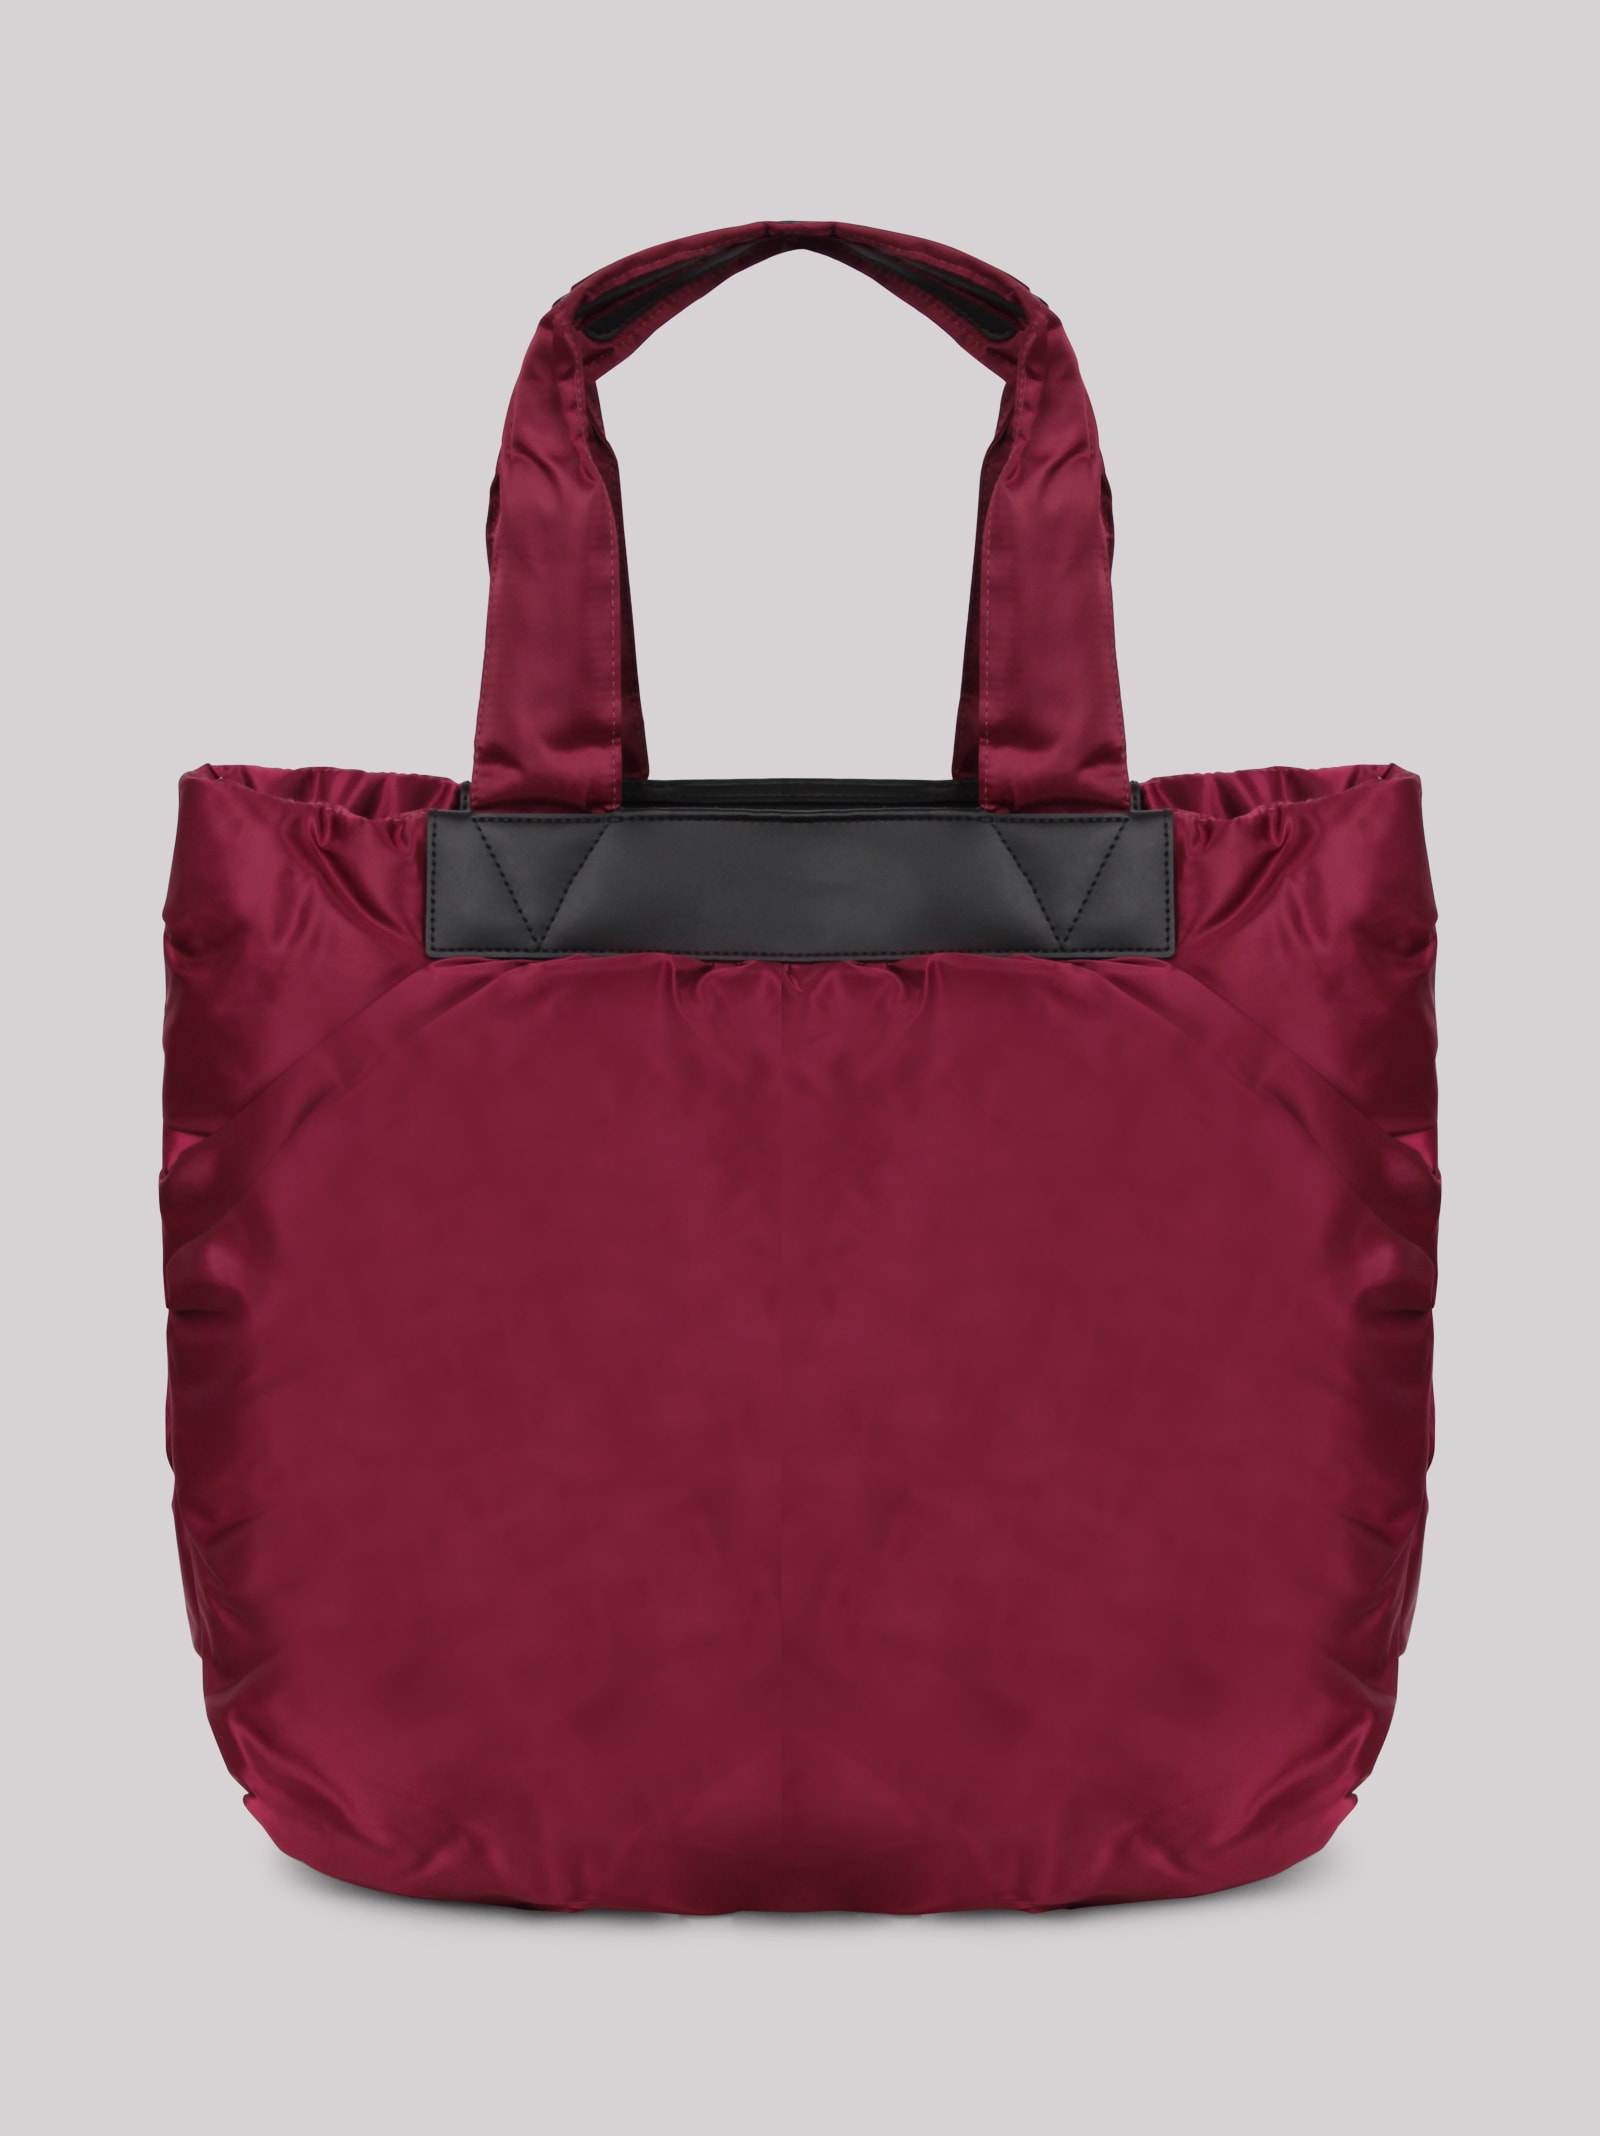 Shop Veecollective Vee Collective Large Caba Ruched Tote Bag